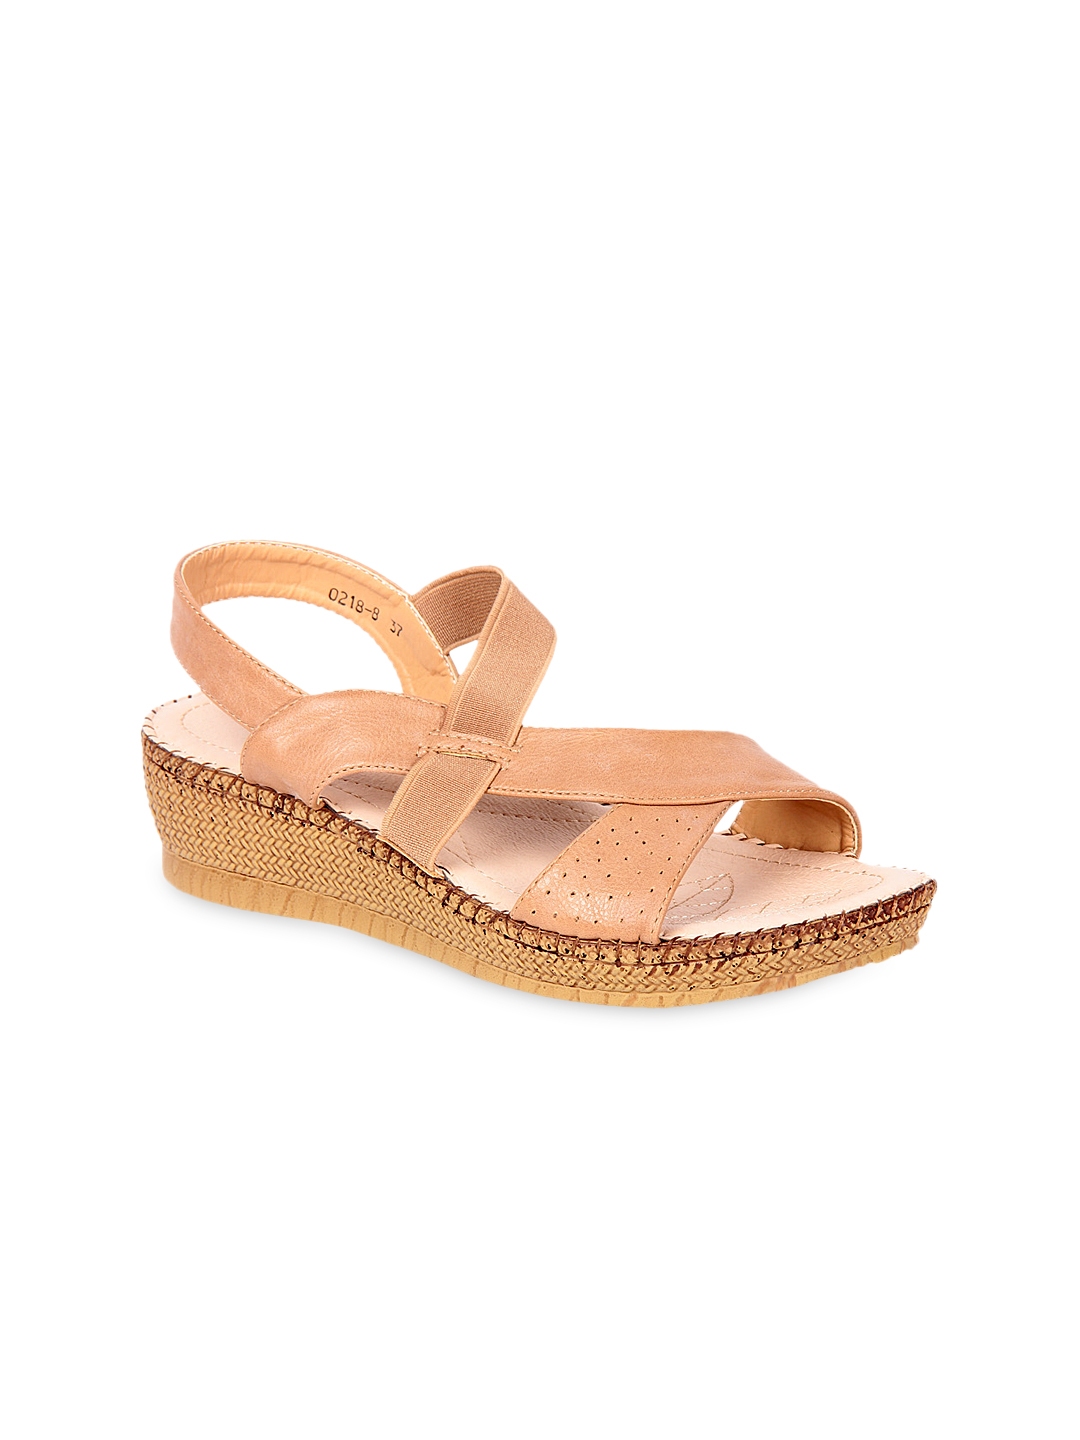 Buy Rose Gold-Toned Heeled Sandals for Women by Steppings Online